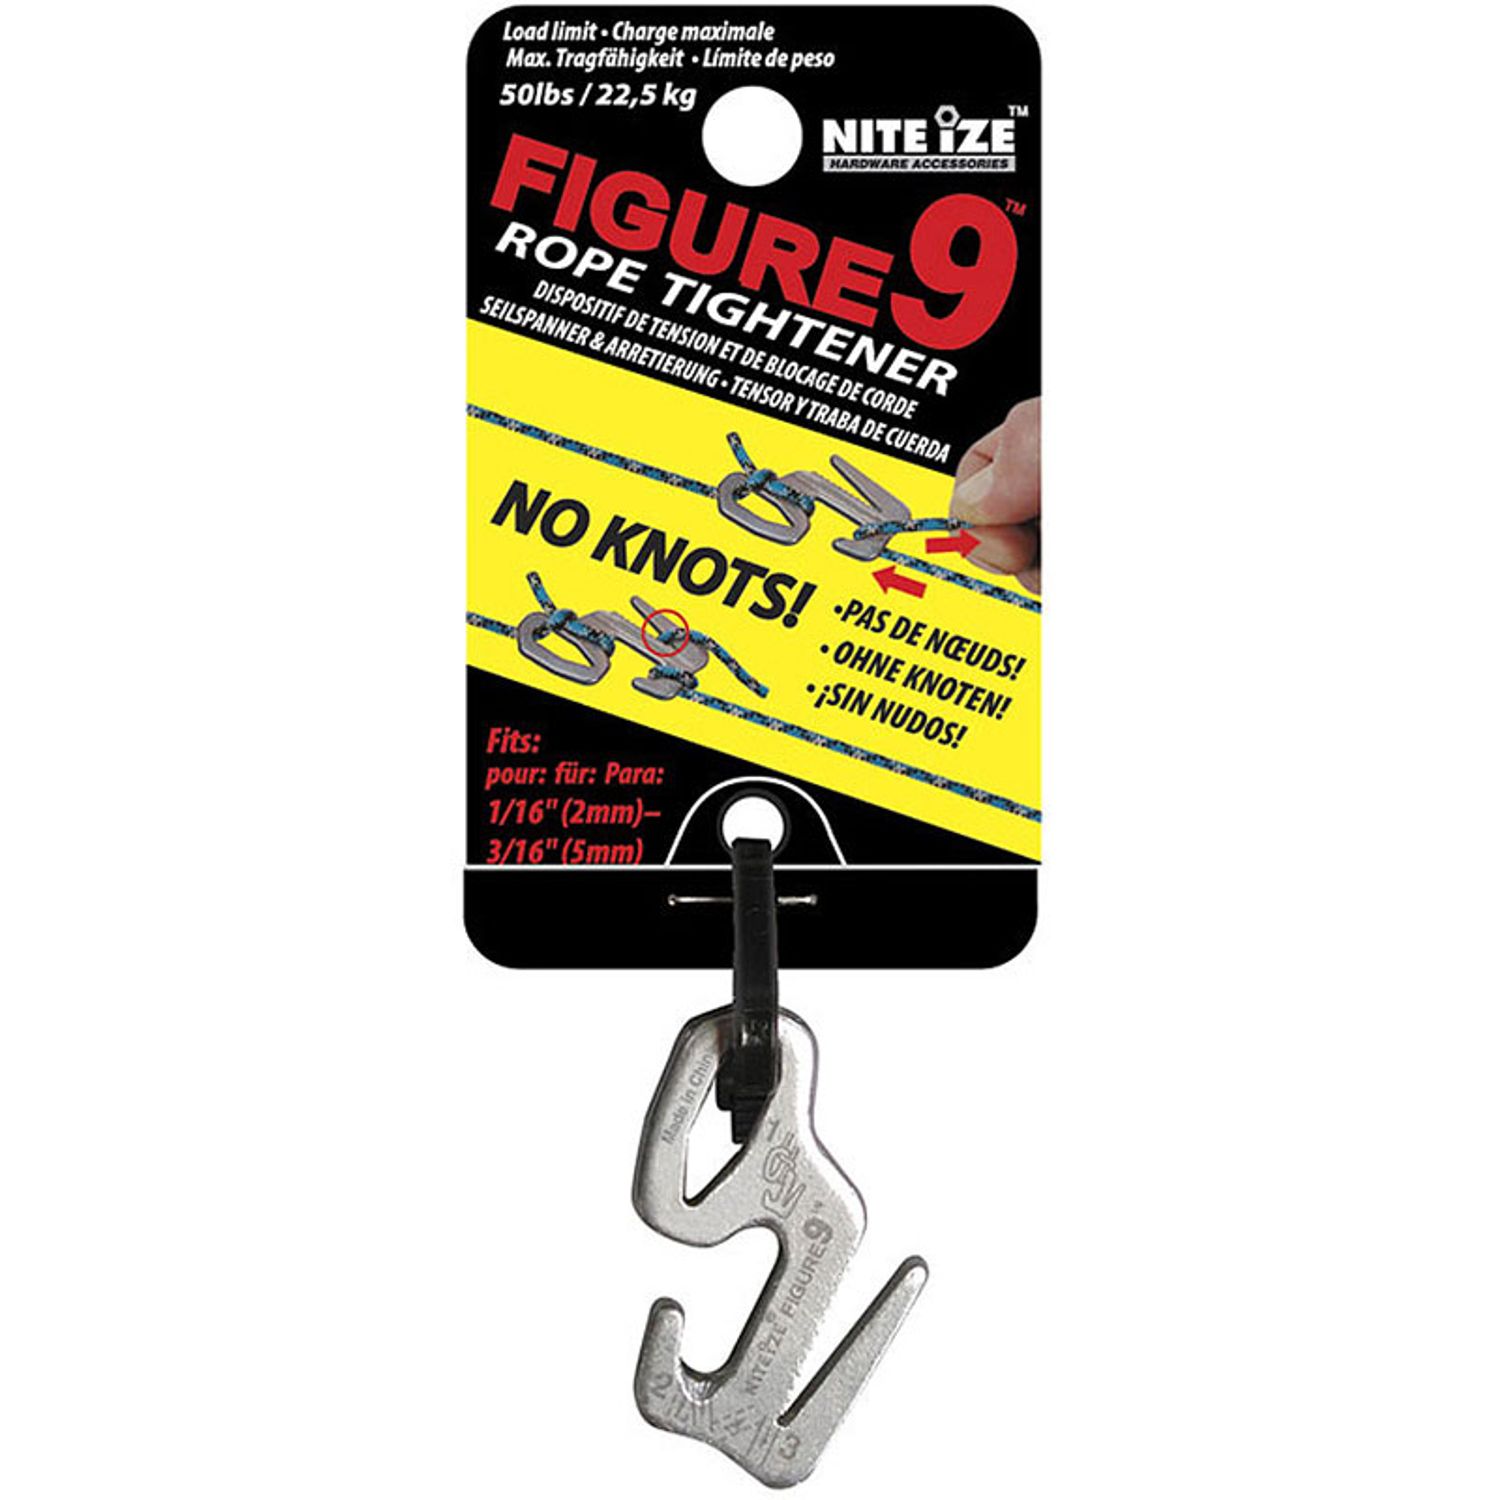 Details about   Nite Ize Small Silver Figure 9 Rope Tightener F9S-02-09 